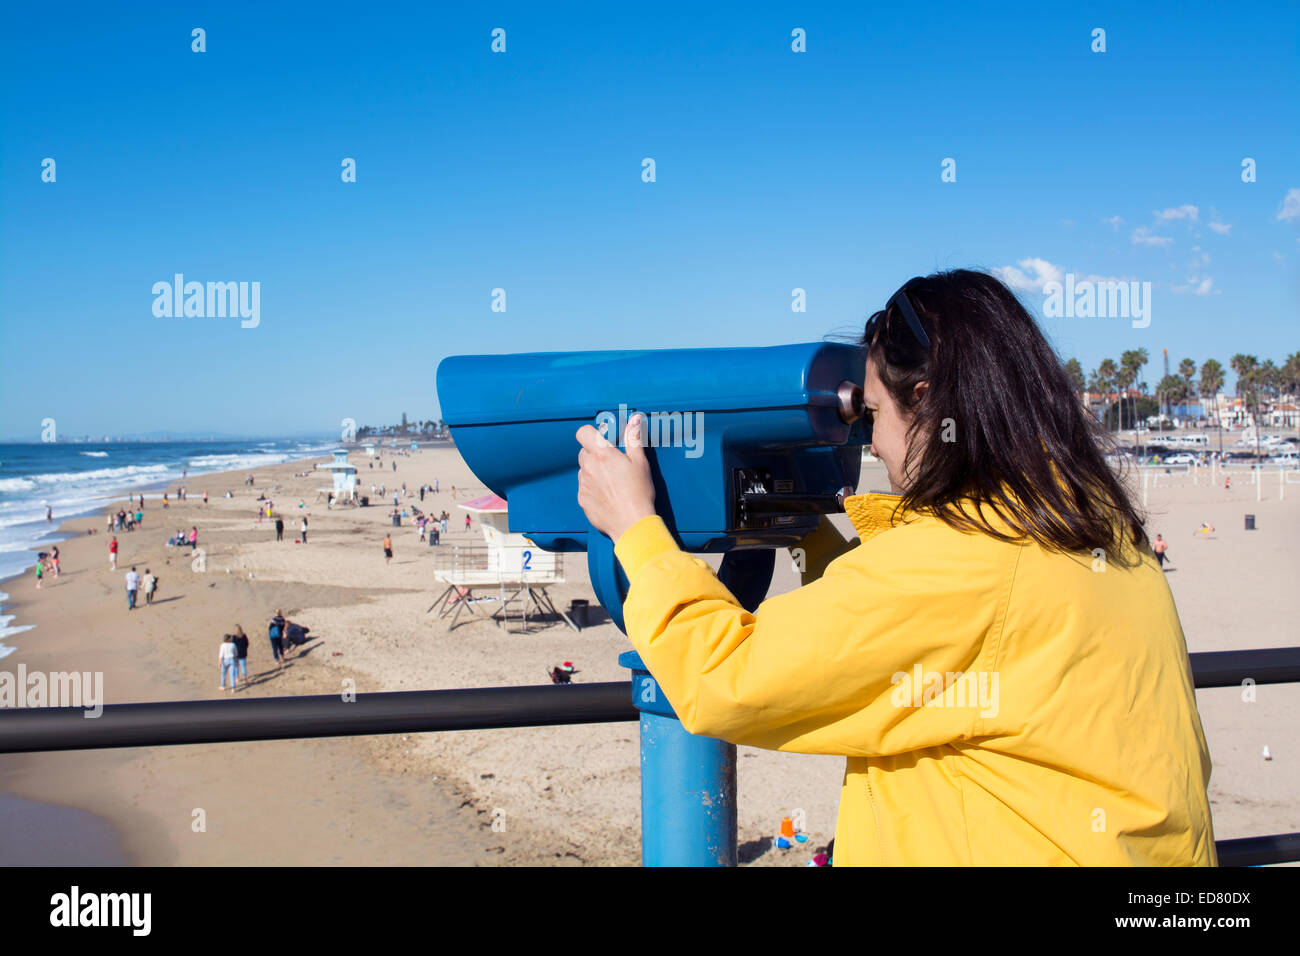 A tourist on the Huntington Beach pier watches surfers through coin operated binoculars during a bright, sunny day. Stock Photo